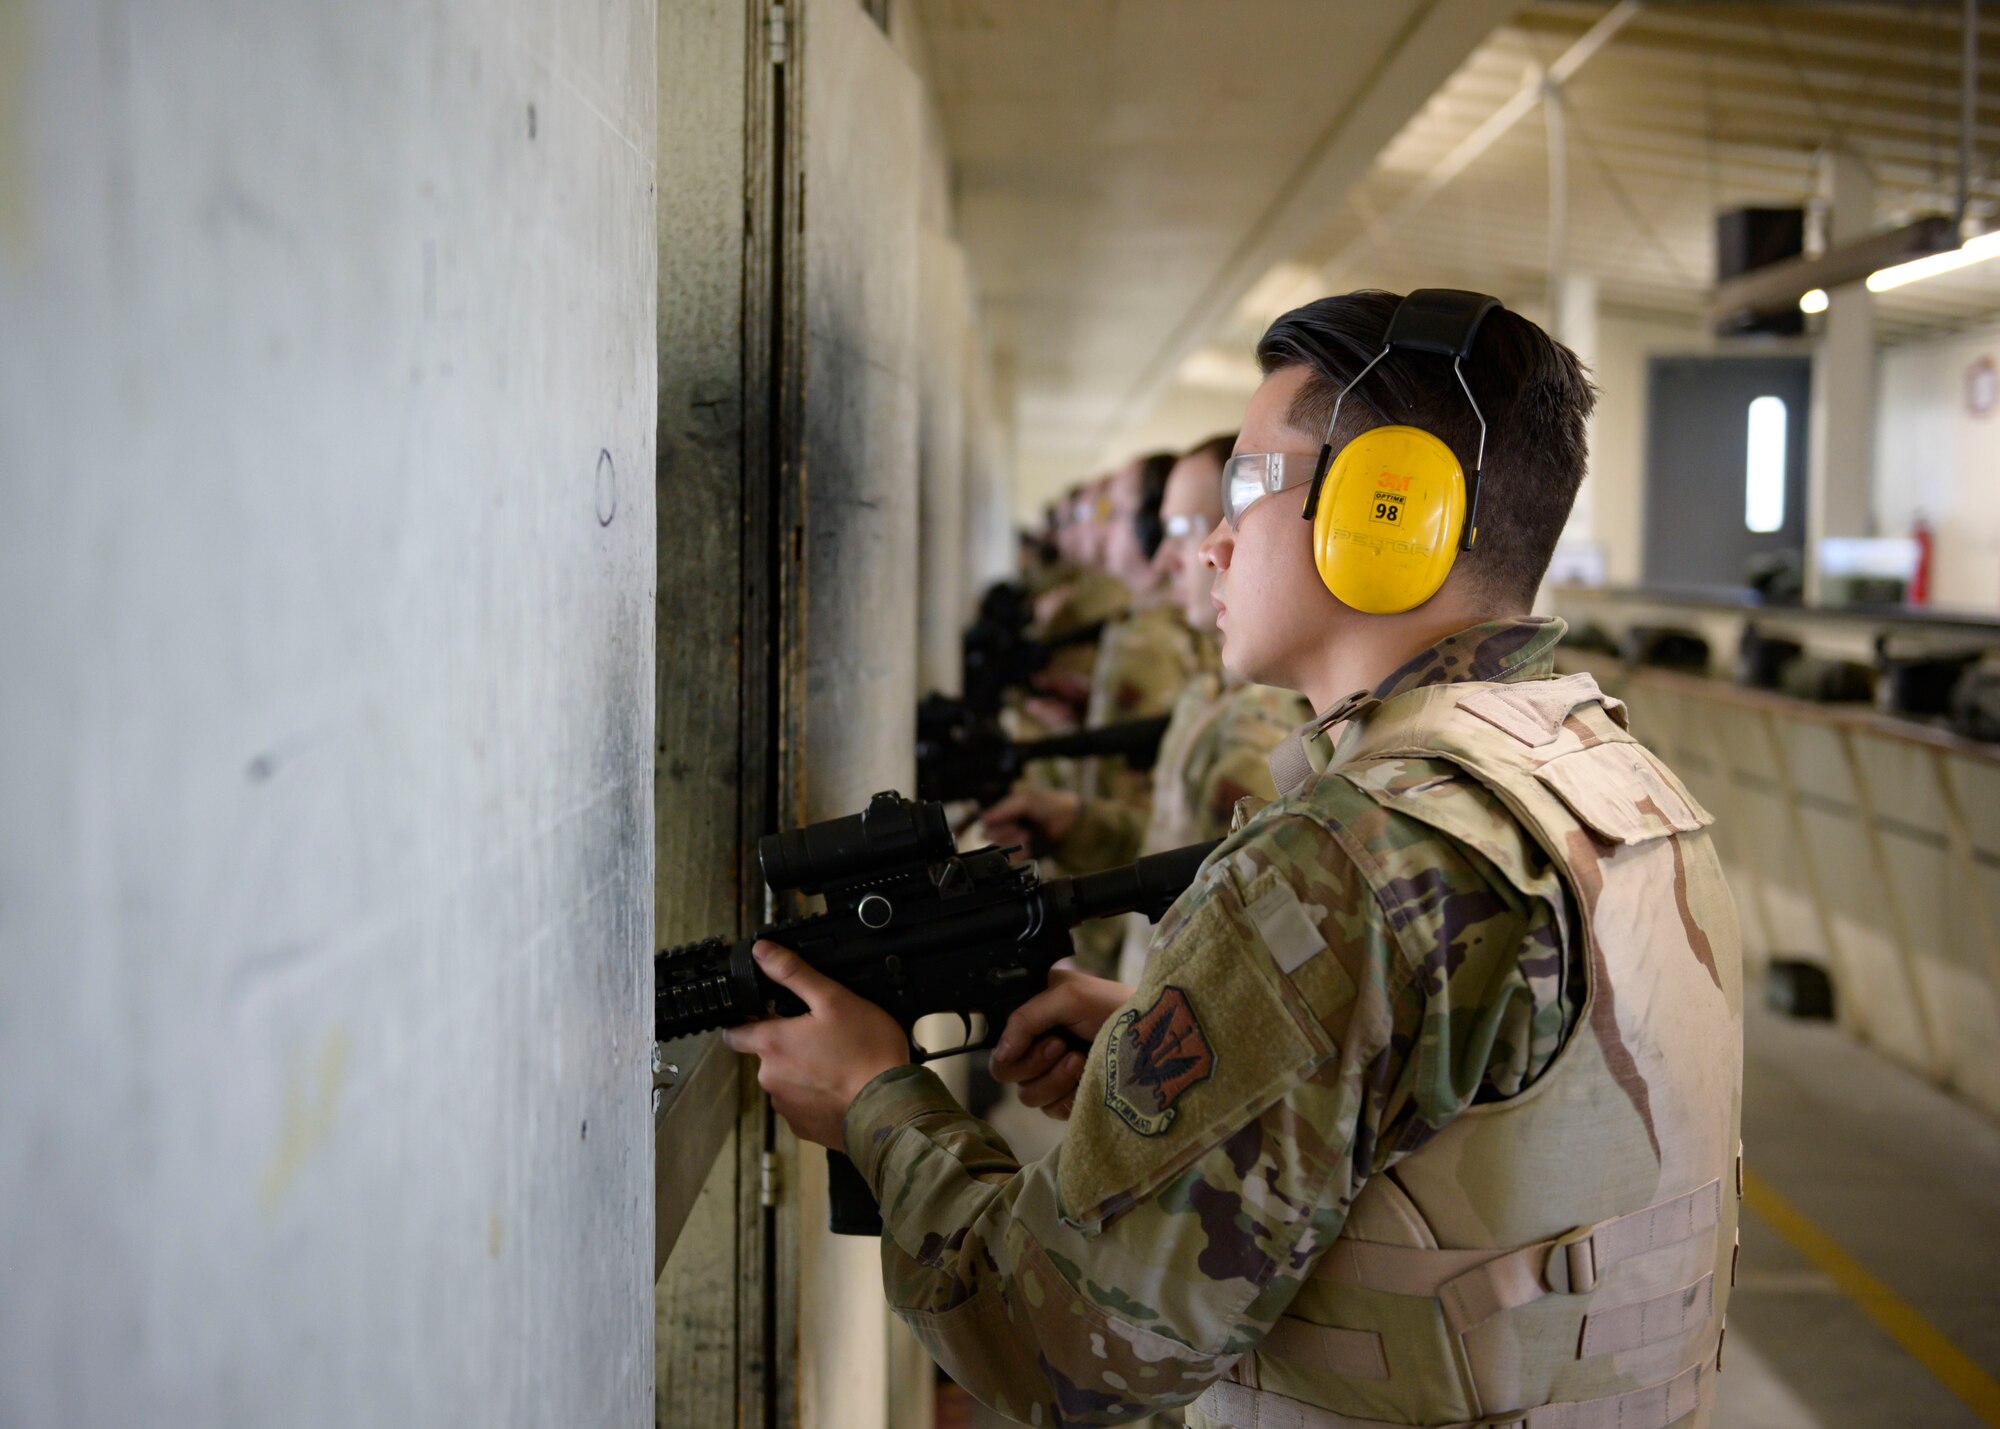 Airmen from Mountain Home Air Force Base go through Combat Arms Training, March 20, 2020, at Mountain Home Air Force Base, Idaho. This training is conducted to give Airmen the combat skills required to protect themselves and fellow Airmen downrange. (U.S. Air Force photo by Senior Airman Tyrell Hall)